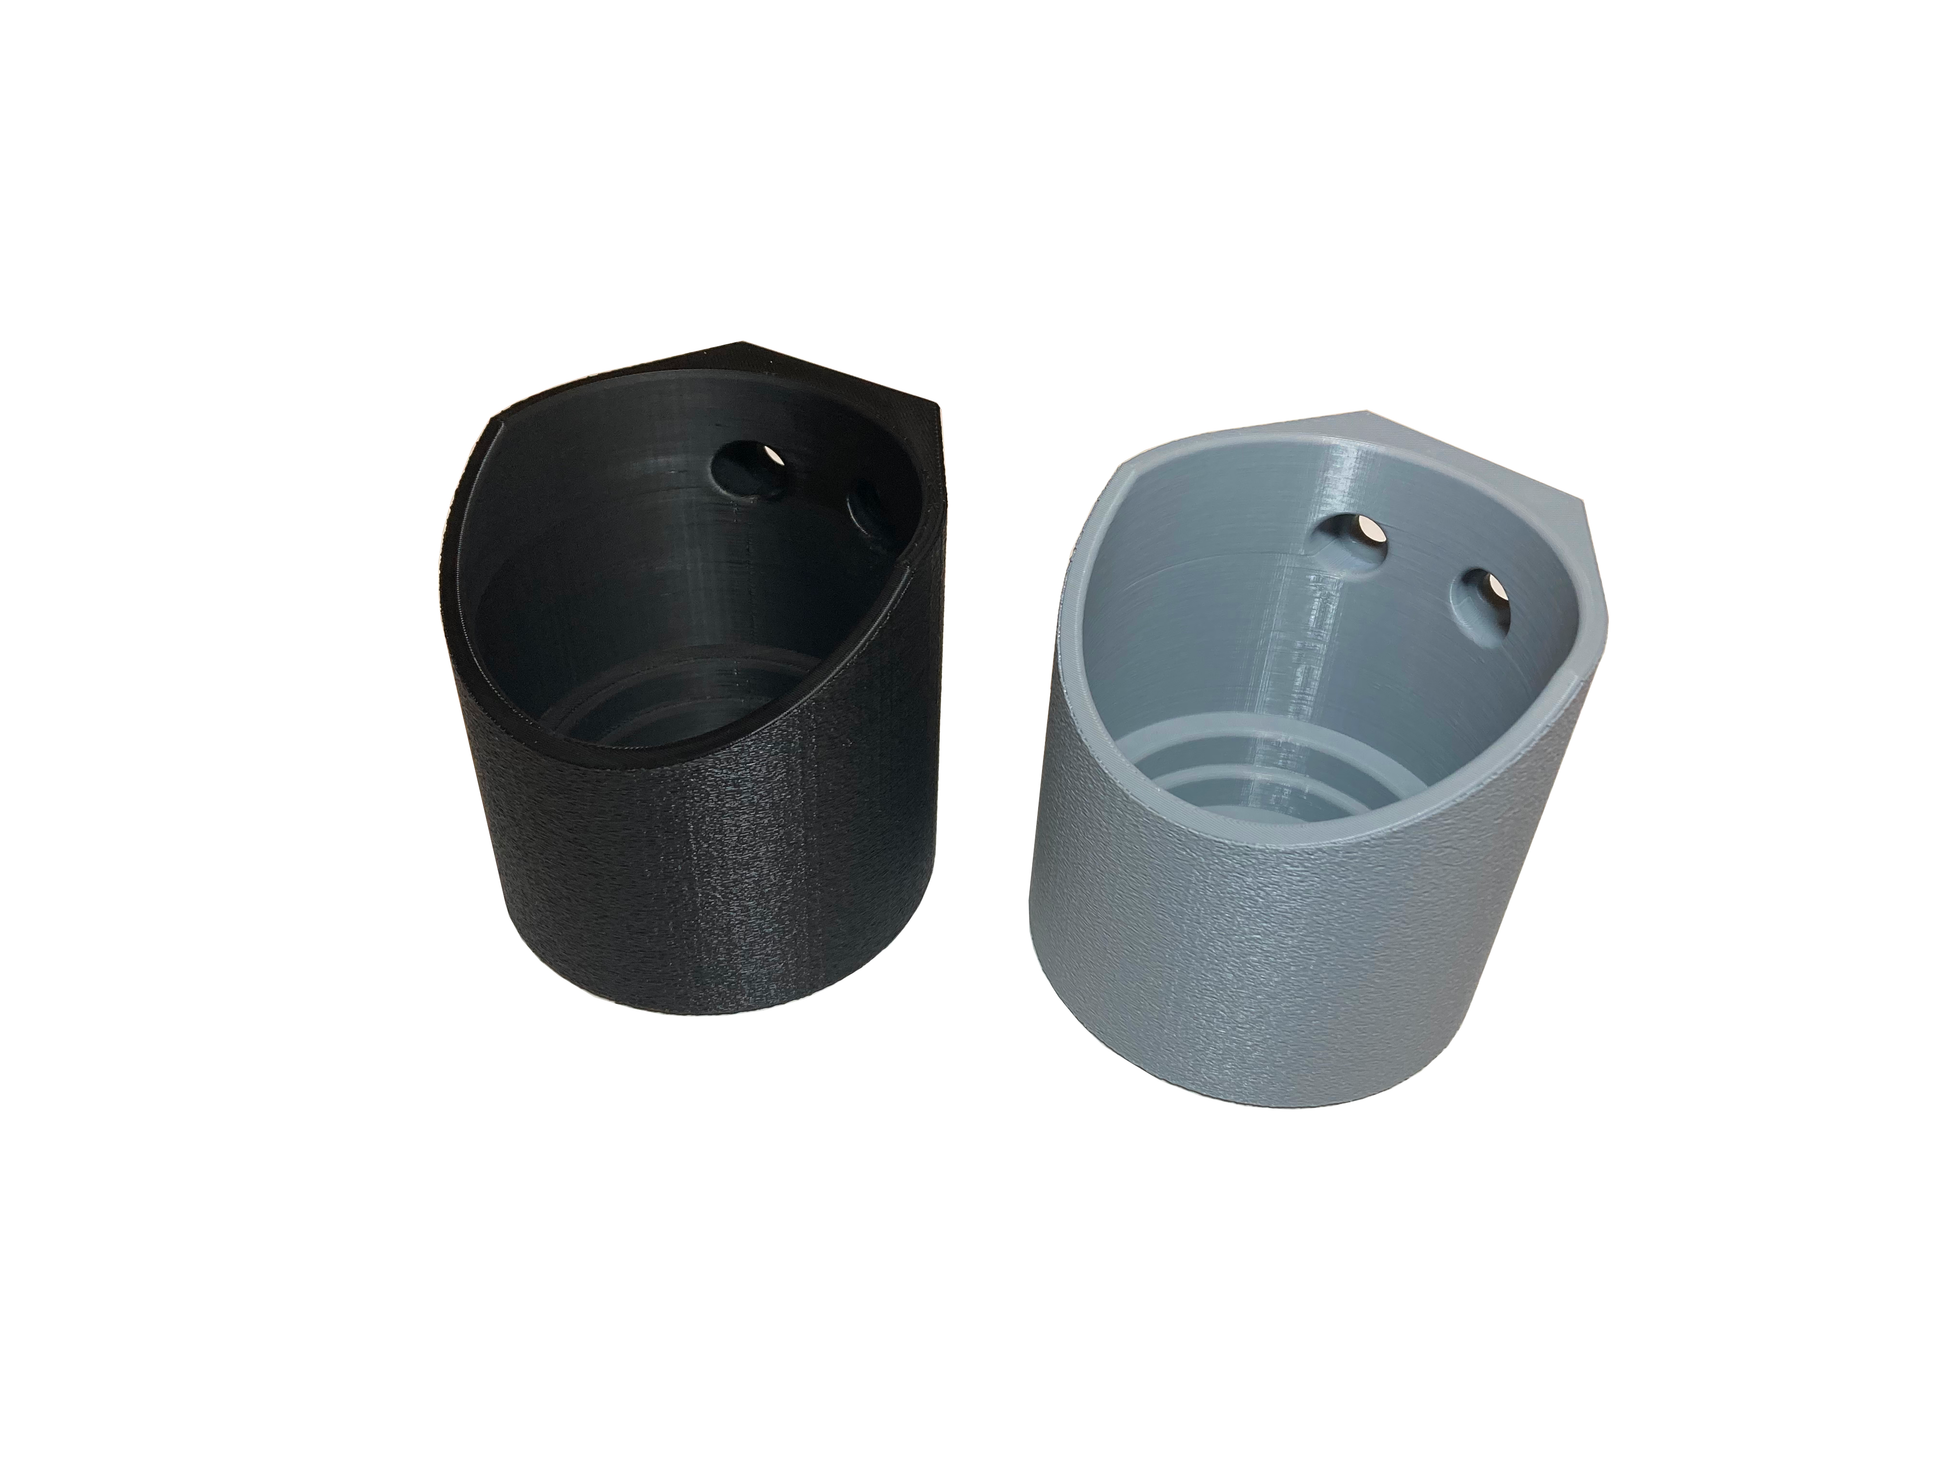 Cup holder for sim racing cockpit, black and gray